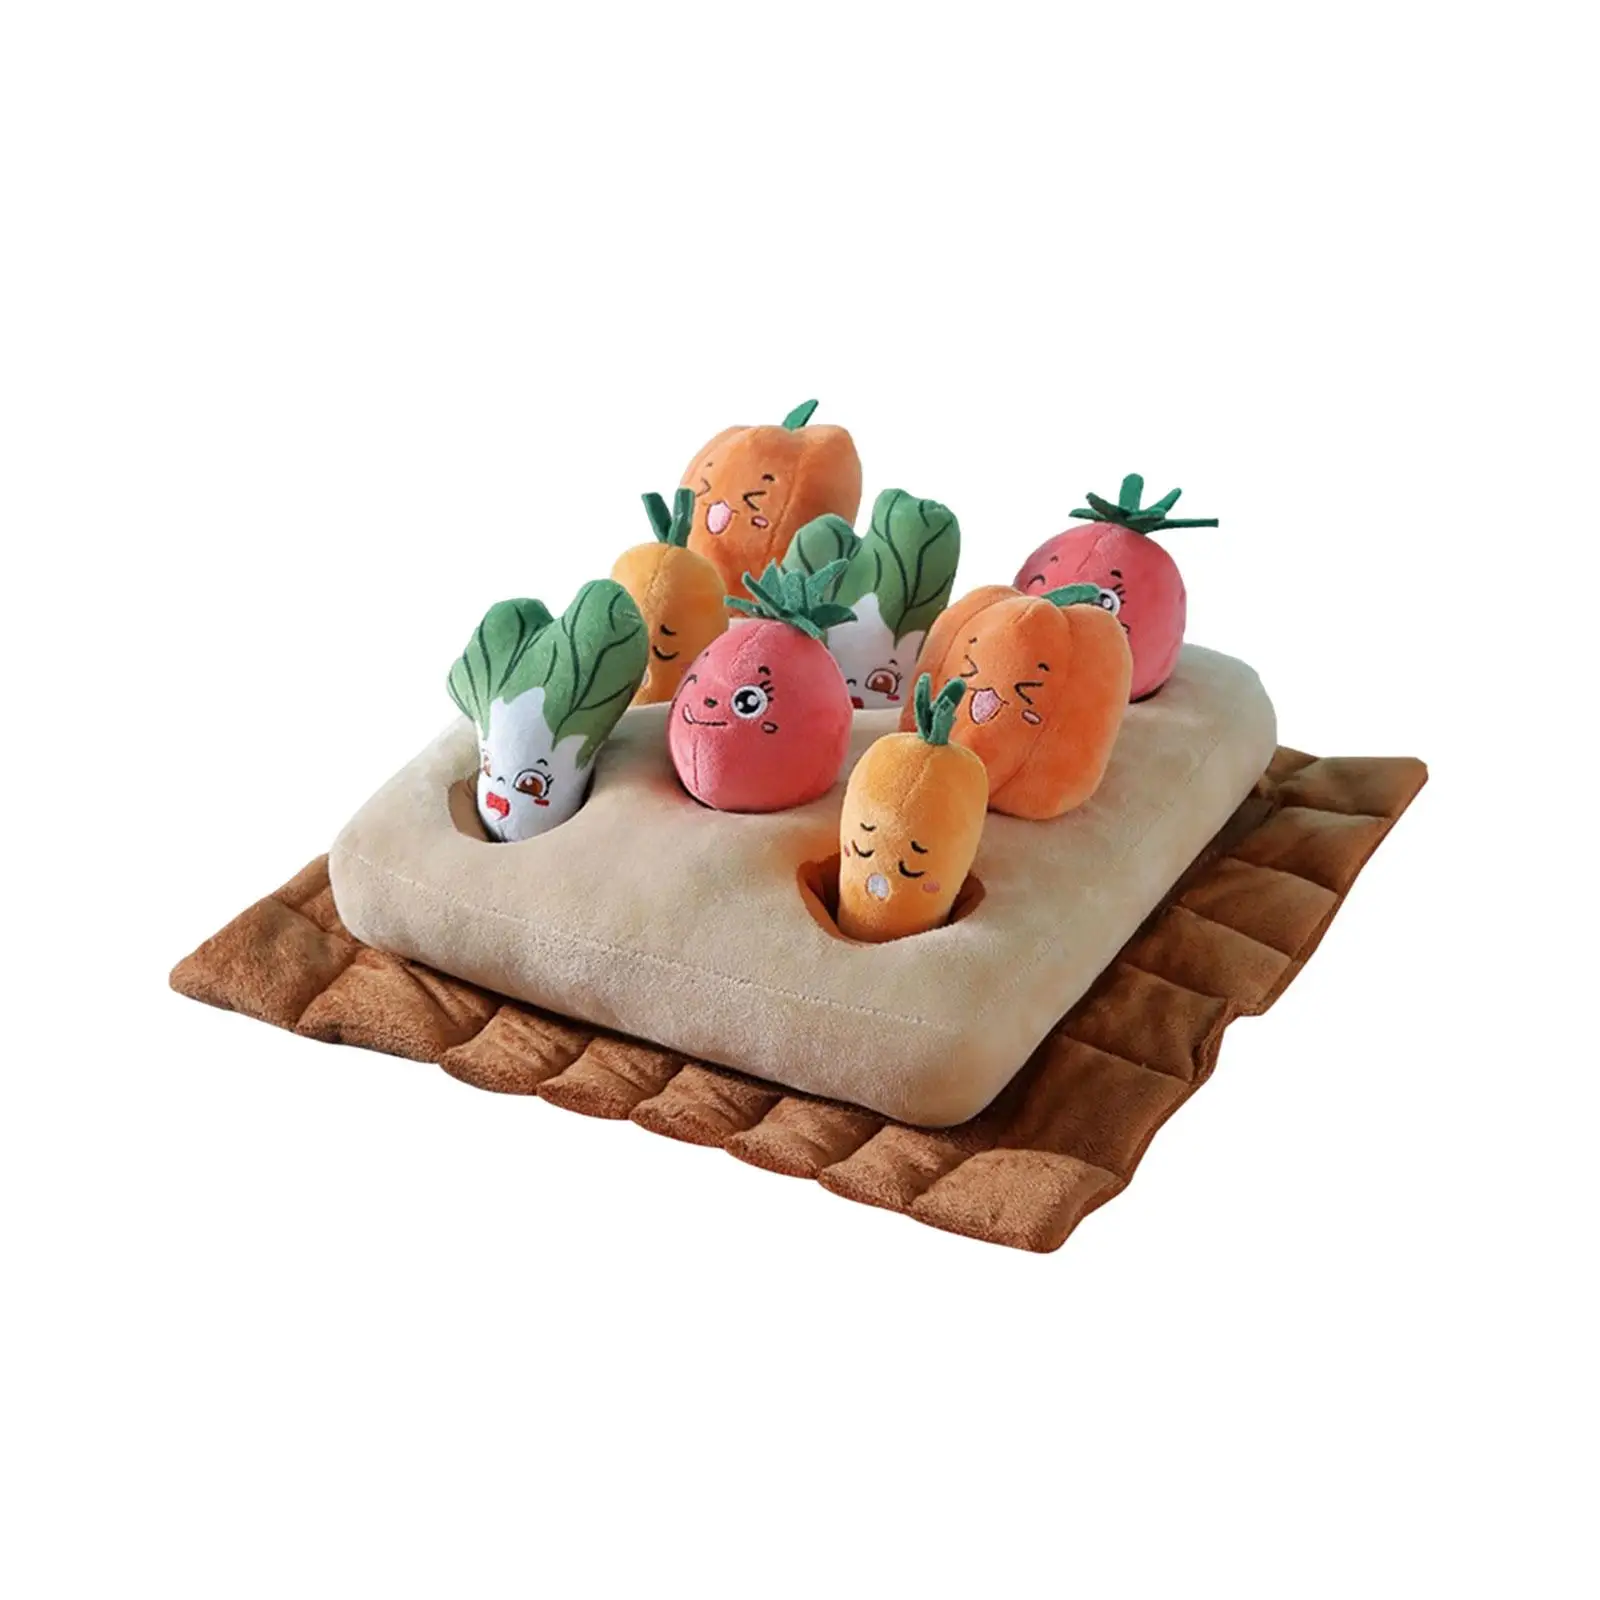 Toddlers Montessori Toys Vegetable Plush Toy for Matching Game Size 37x35cm